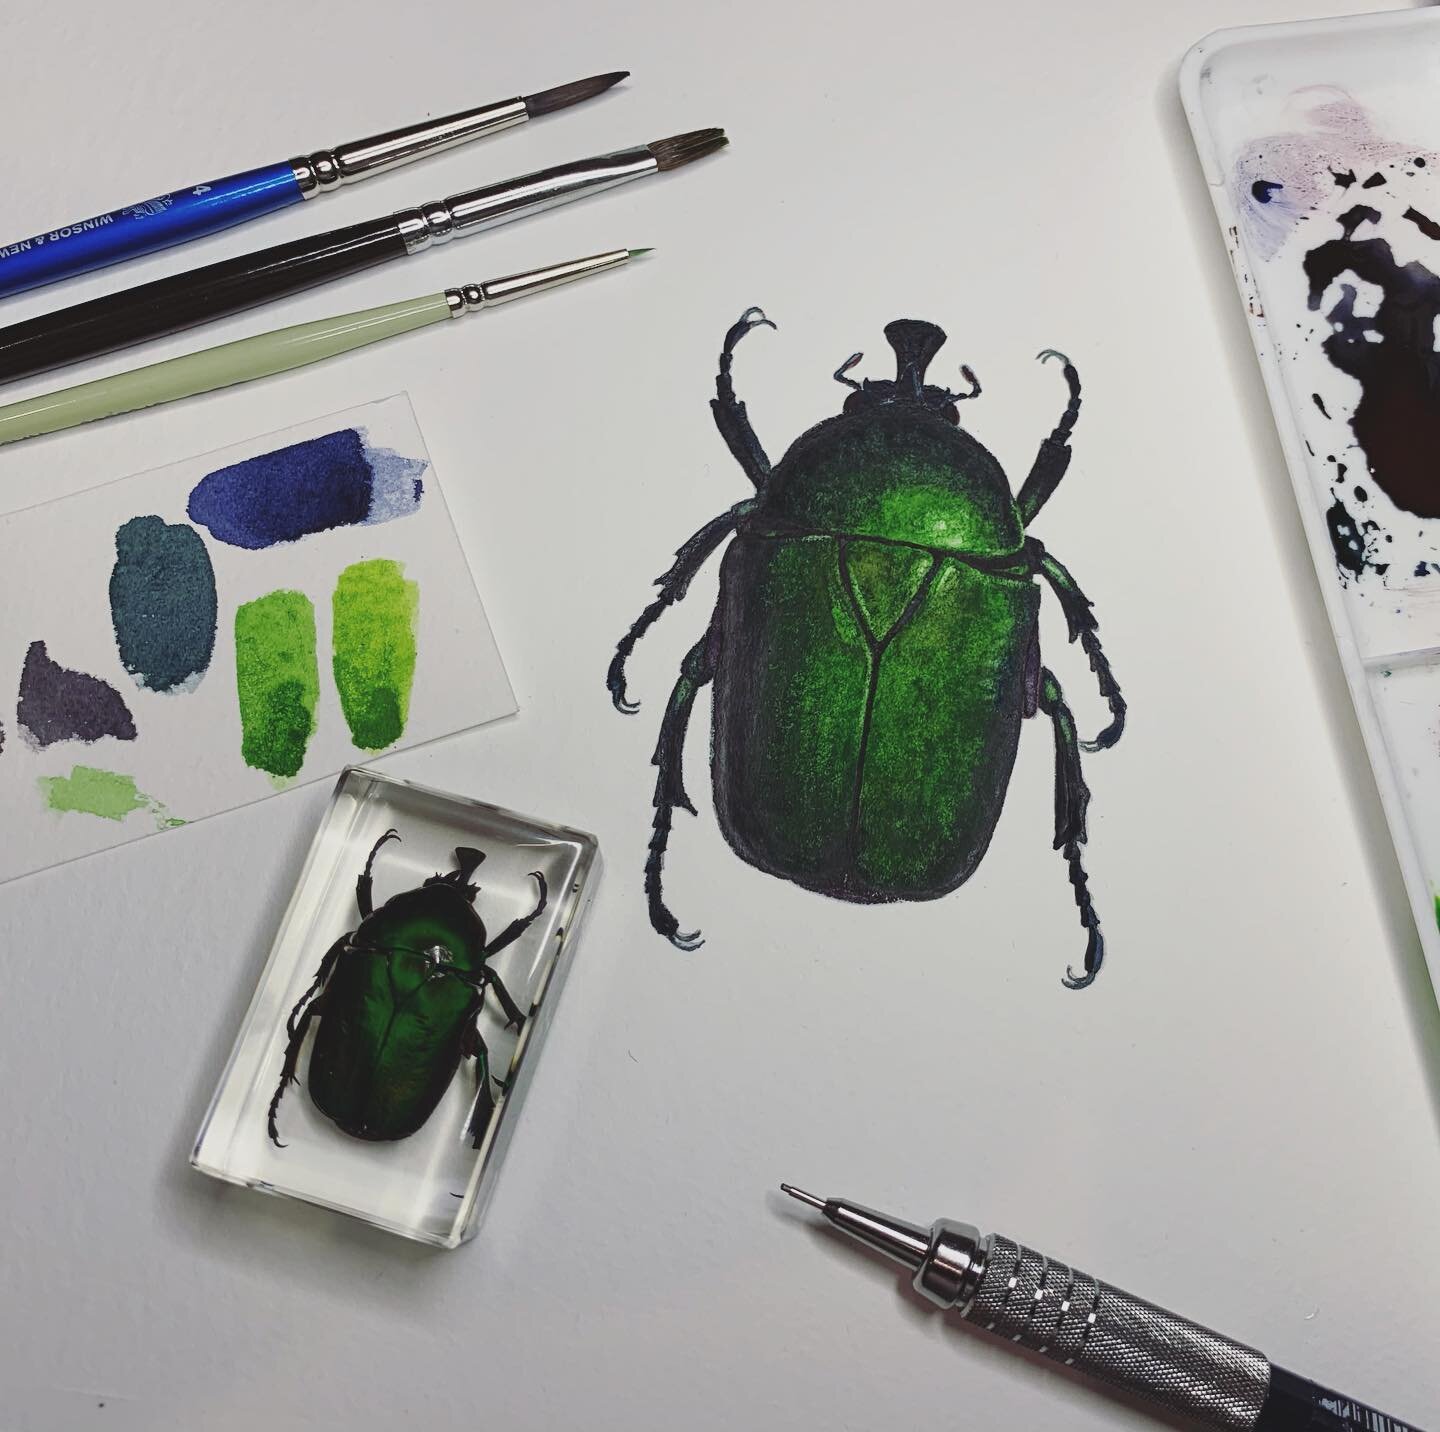 Next demonstration video in the art lessons series through www.thefoster.org/mattias 🪲 
.
.
.
.
.
.
#thefoster #painting #watercolor #watercolour #insect #acuarela #iridescent #winsorandnewton #lesson #artlesson #artdemo